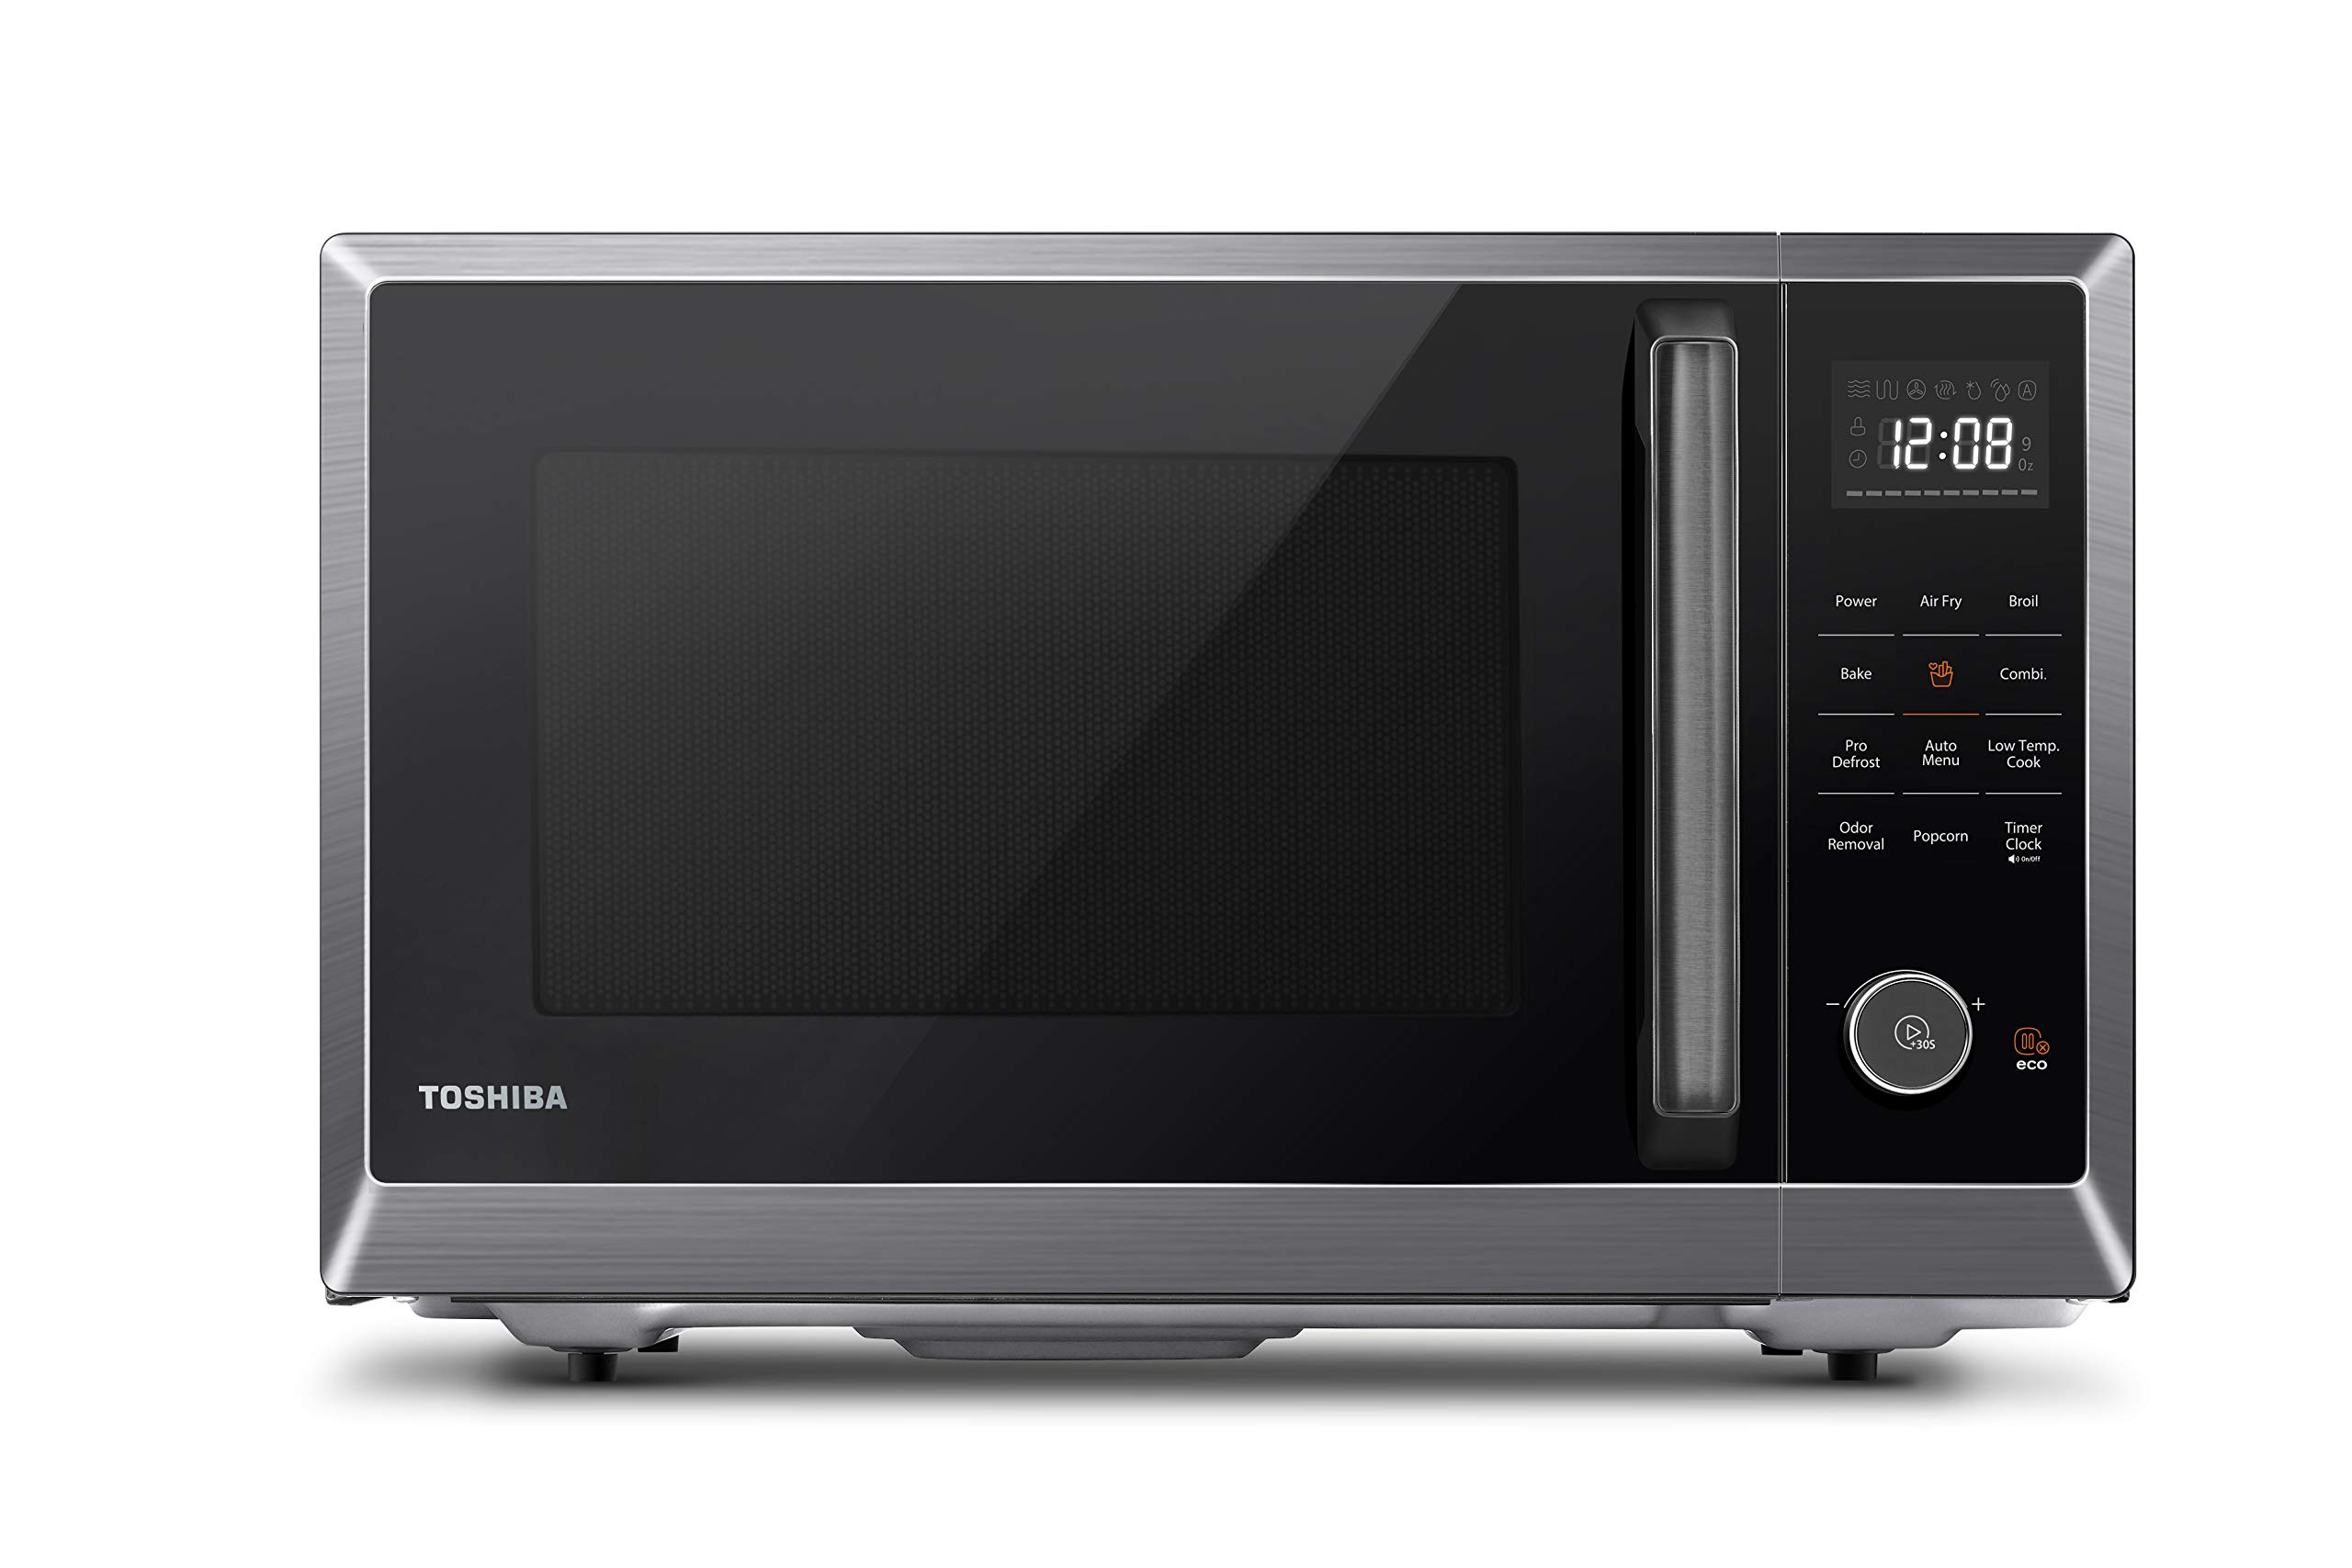 TOSHIBA Air Fryer Combo 8-in-1 Countertop Microwave Oven, Convection, Broil, Odor removal, Mute Function, 12.4